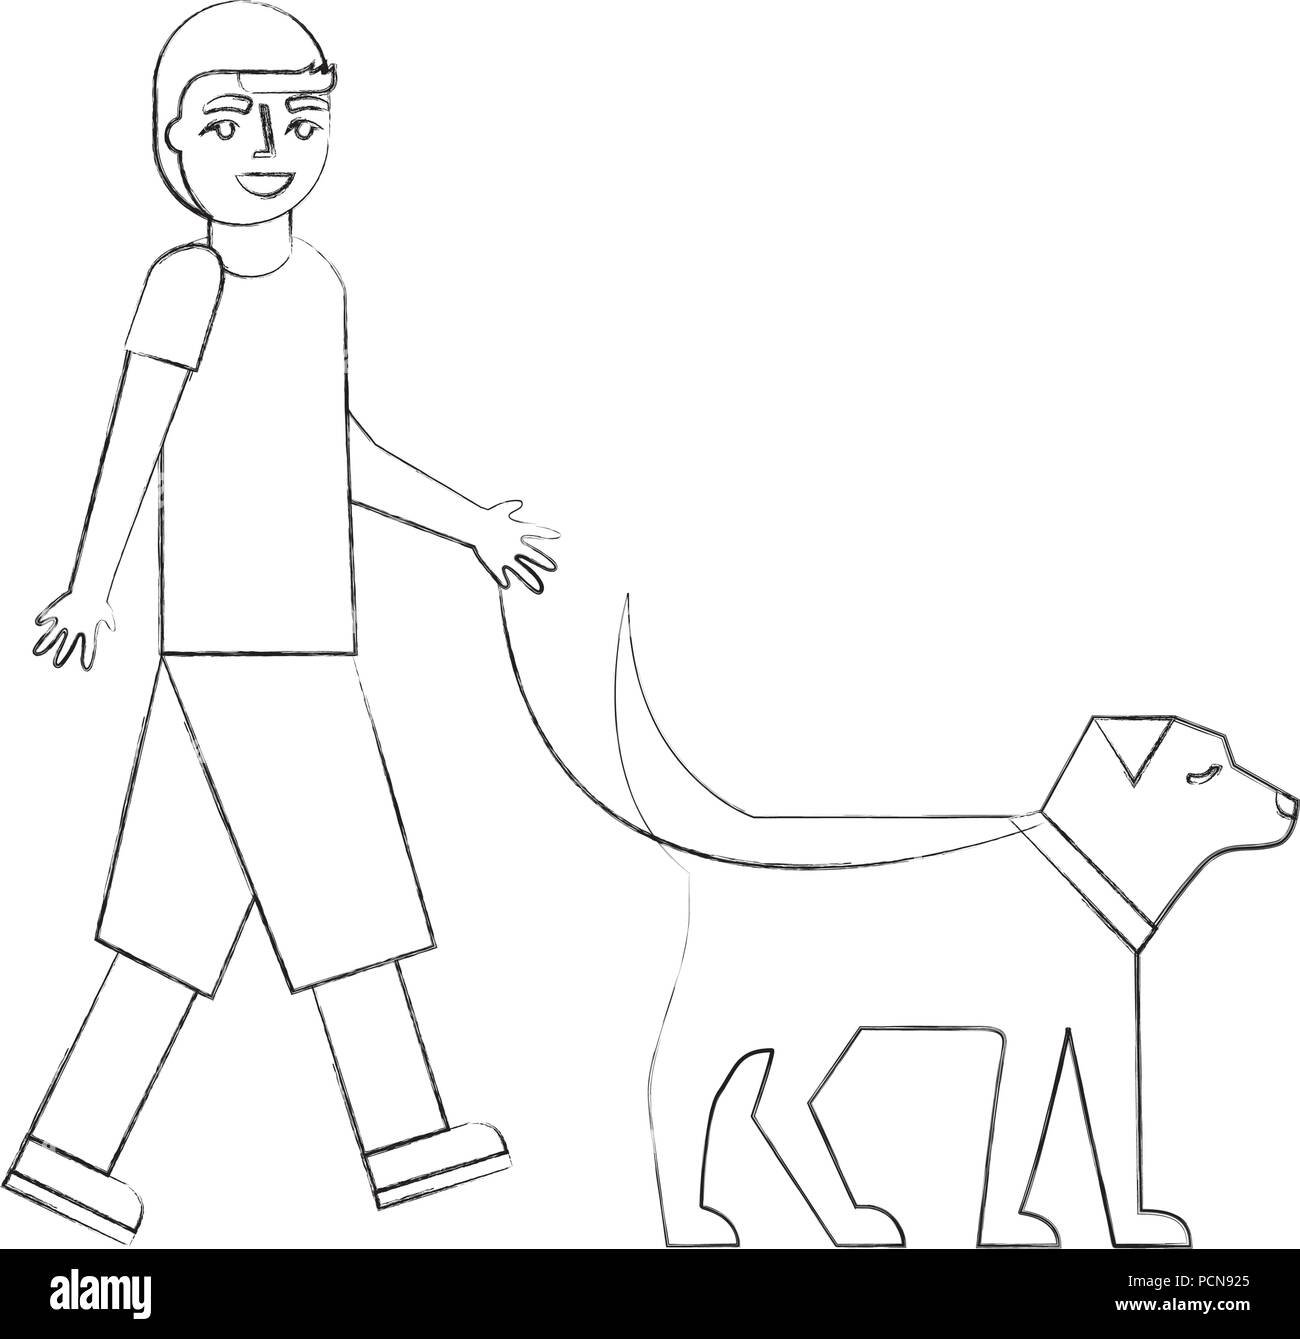 Featured image of post How To Draw A Person Walking A Dog Step By Step : Bernard dog using # 2 pencil.